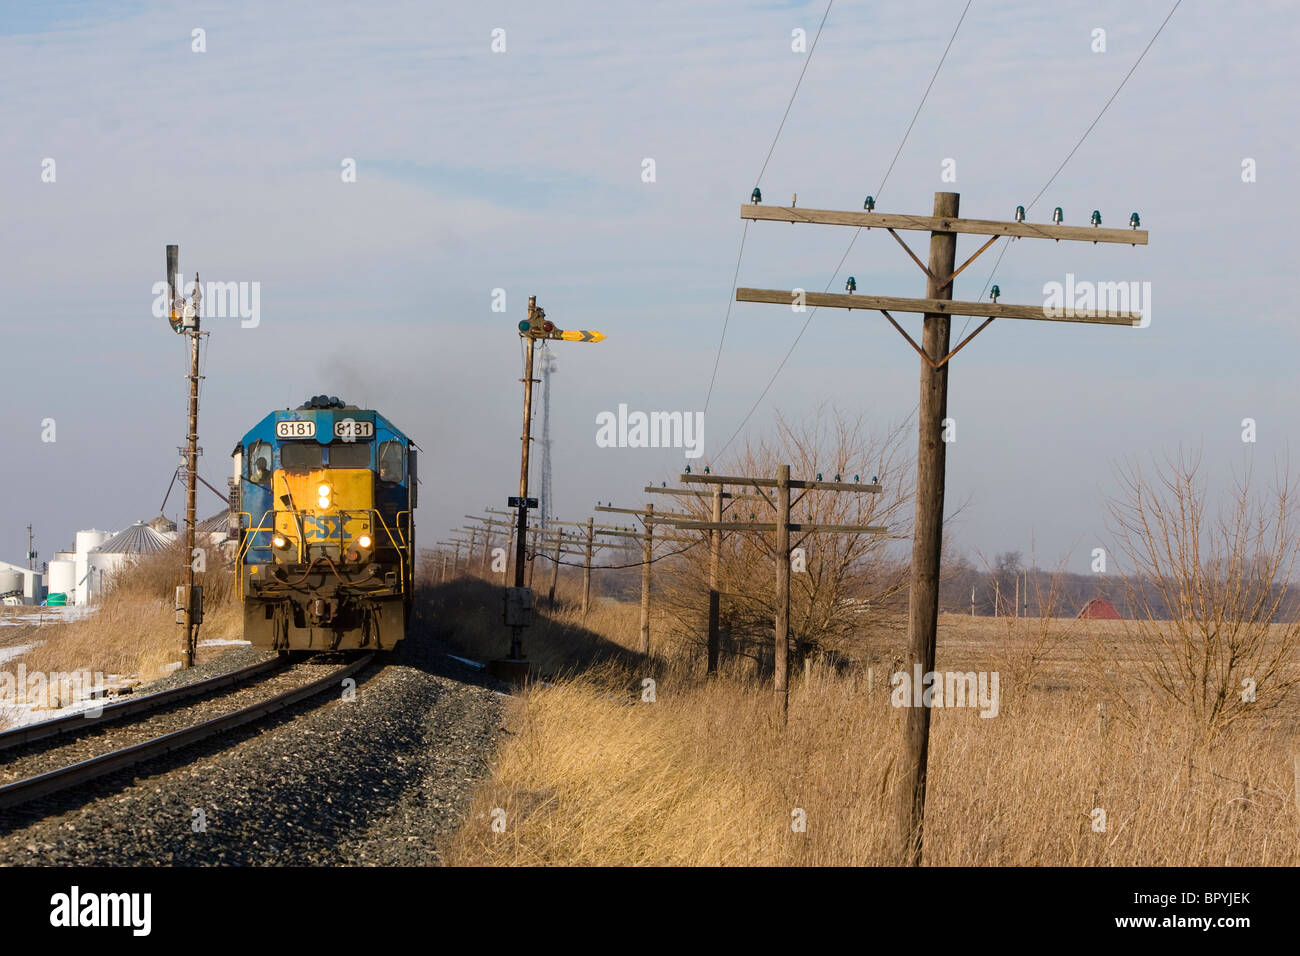 A CSX Transportation train rolls by a pair of vintage semaphore signals in rural Indiana. Stock Photo